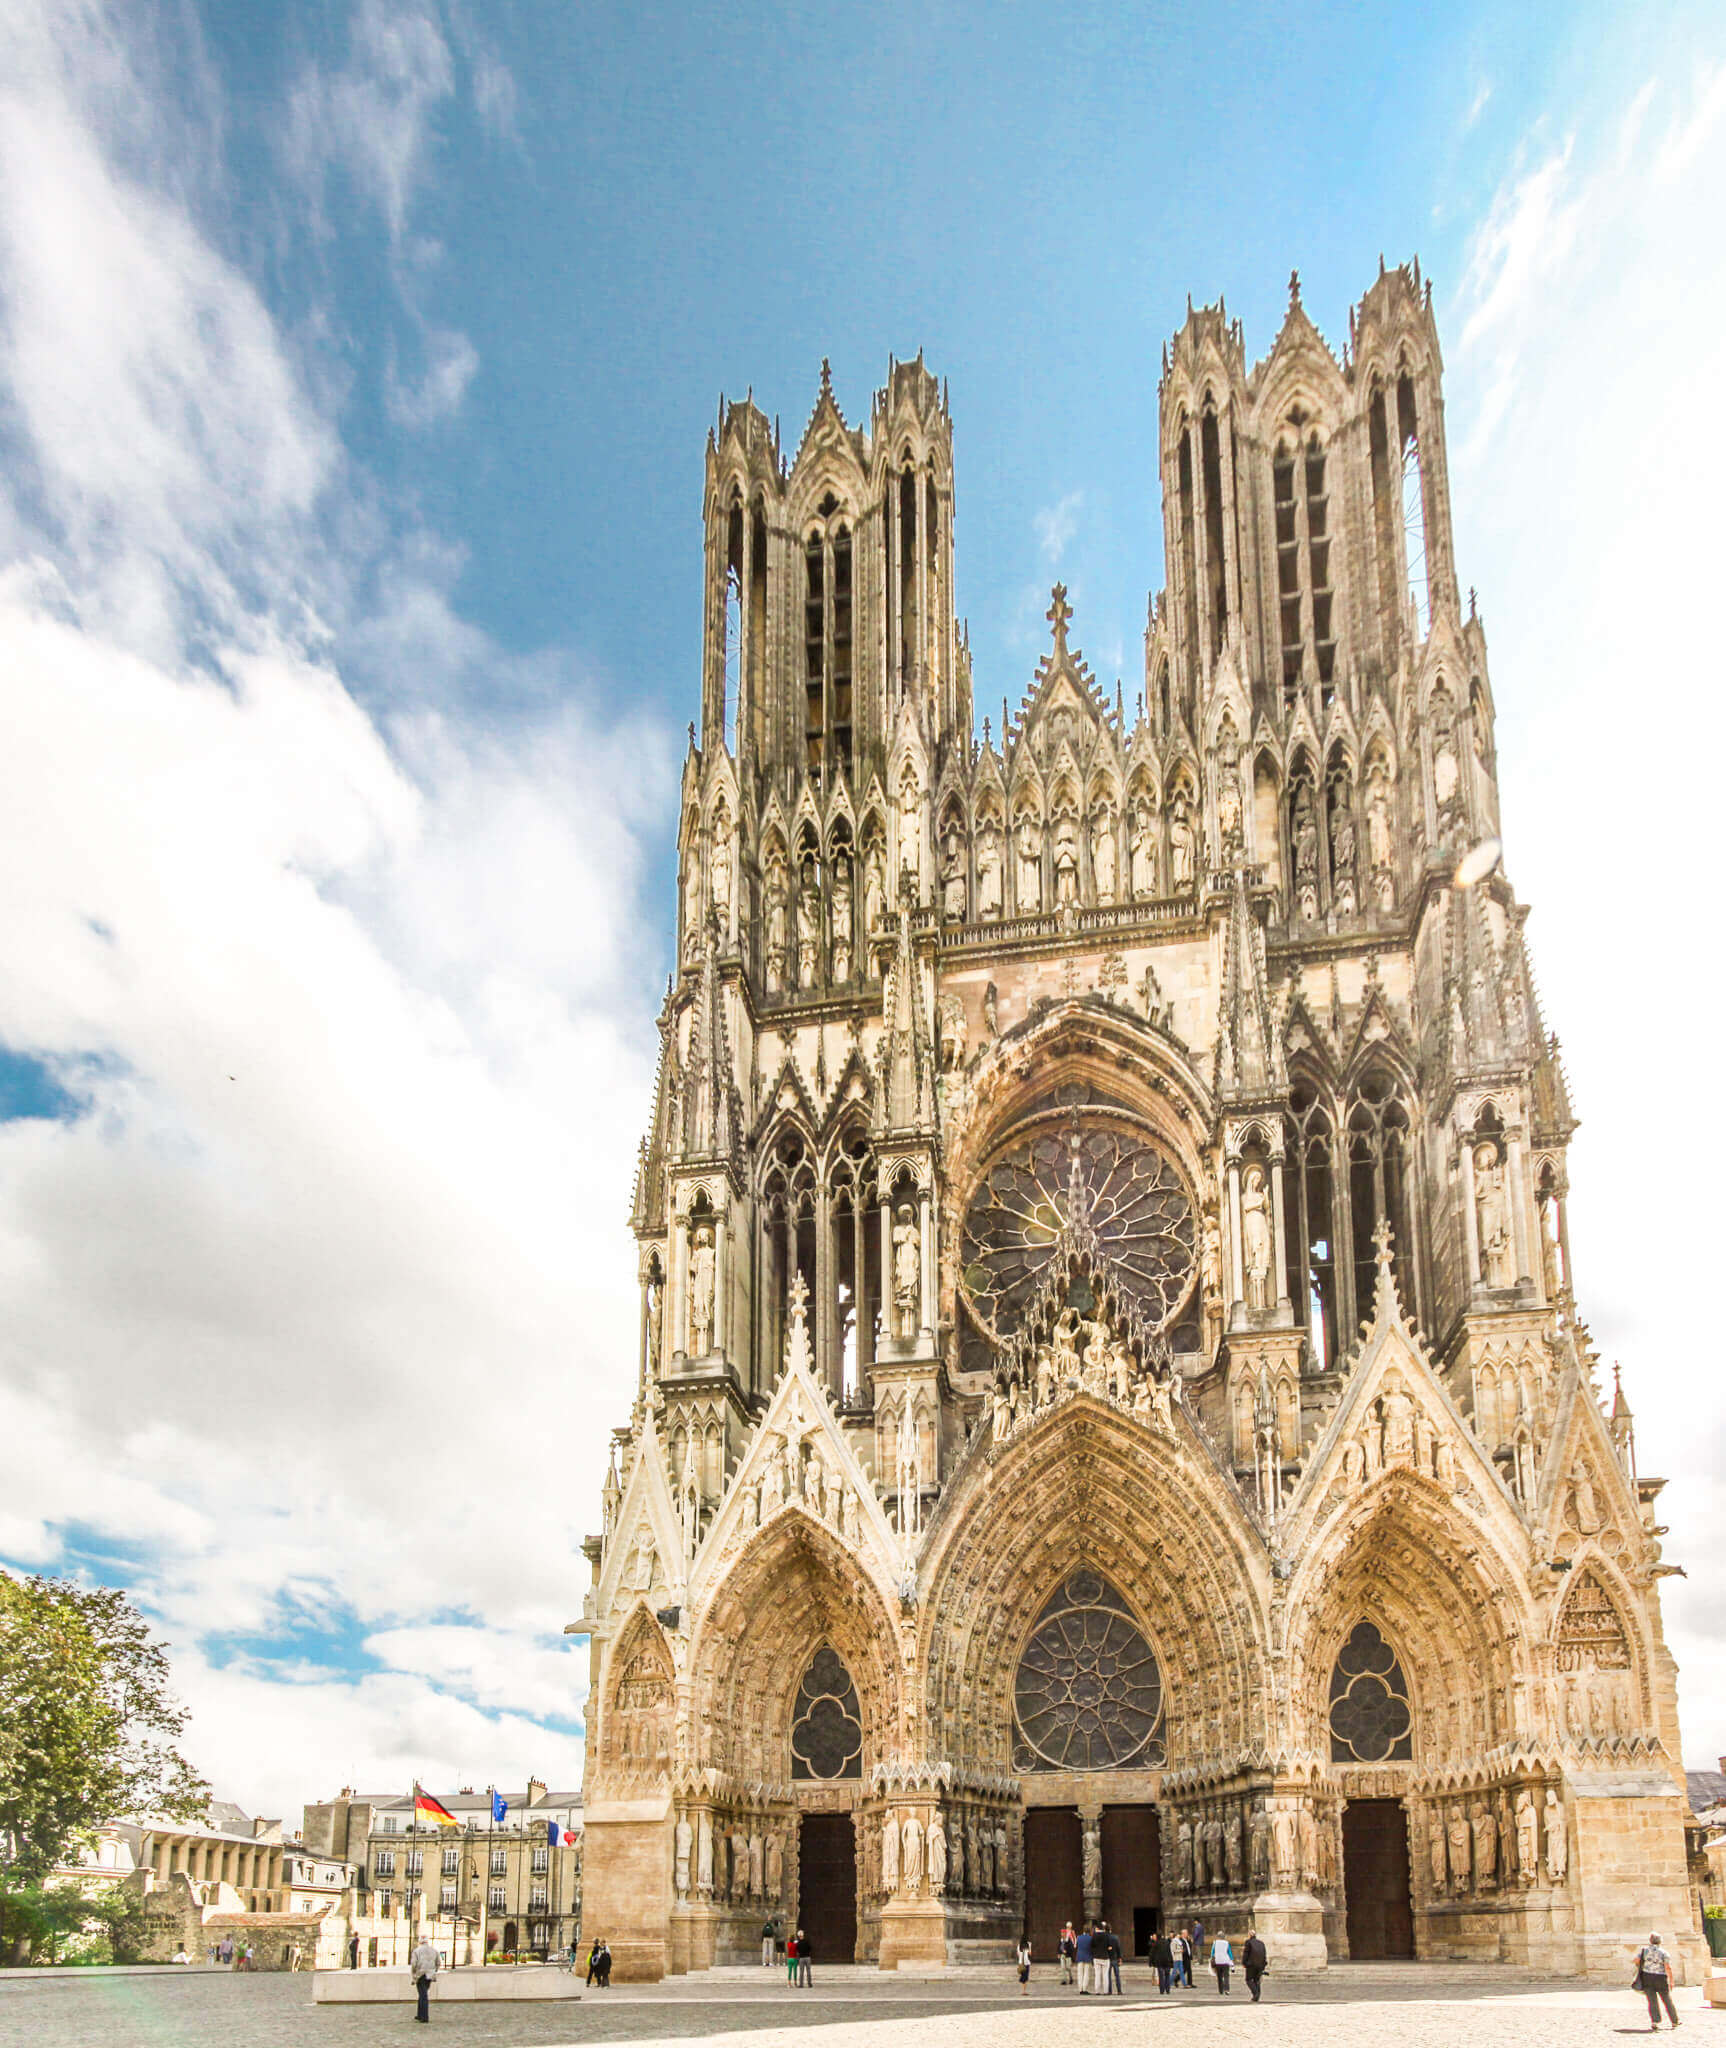 The High Gothic facade of the Reims Cathedral